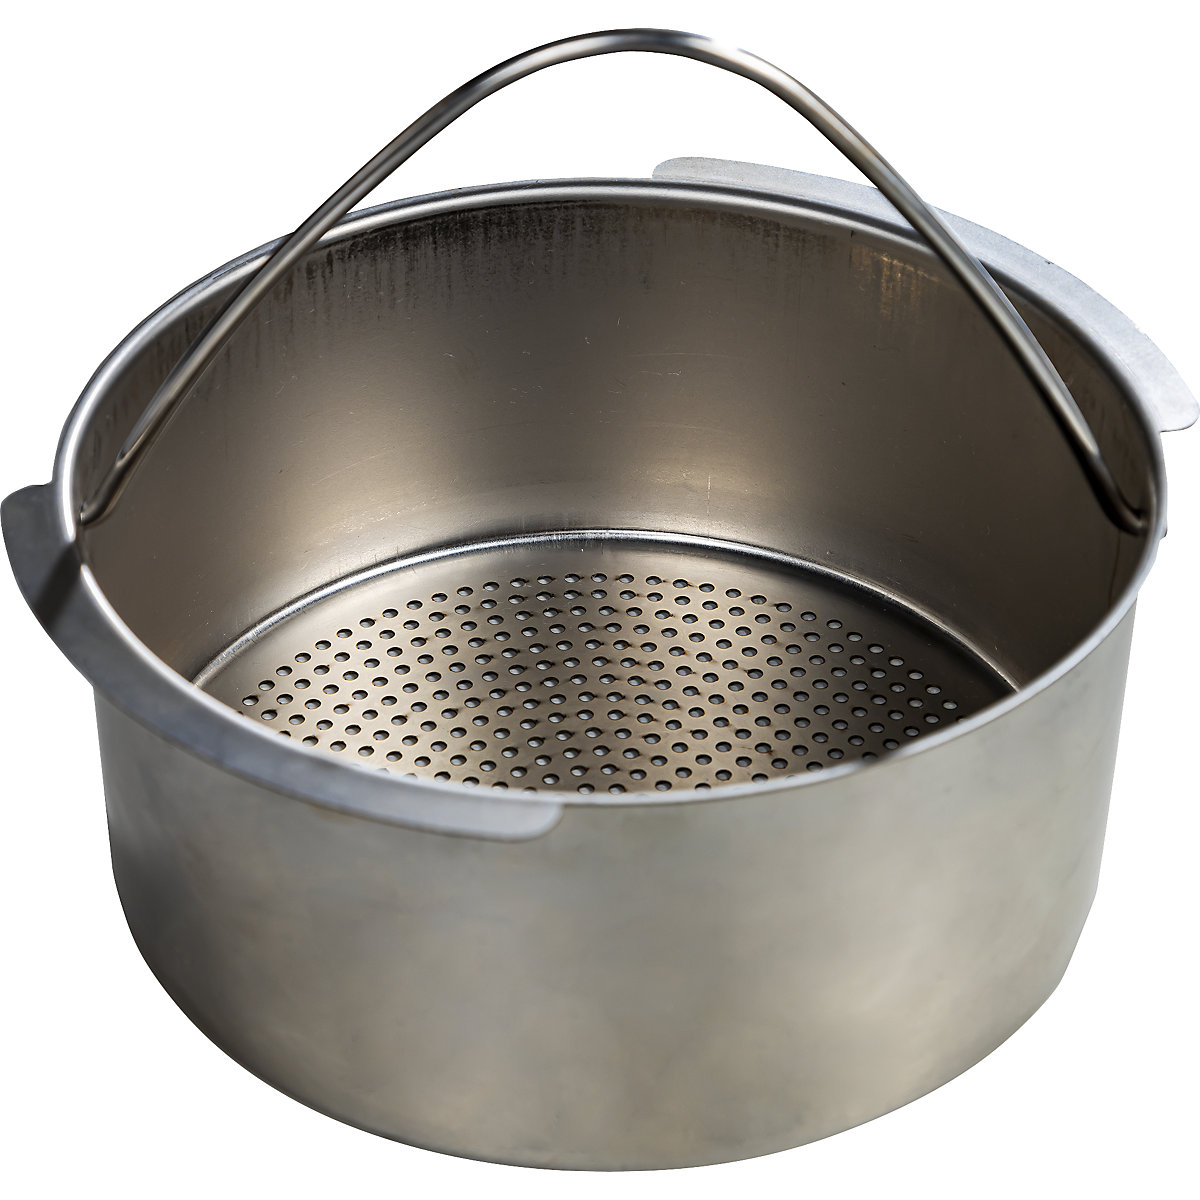 Parts basket – FALCON, stainless steel, for small parts cleaner 8 l